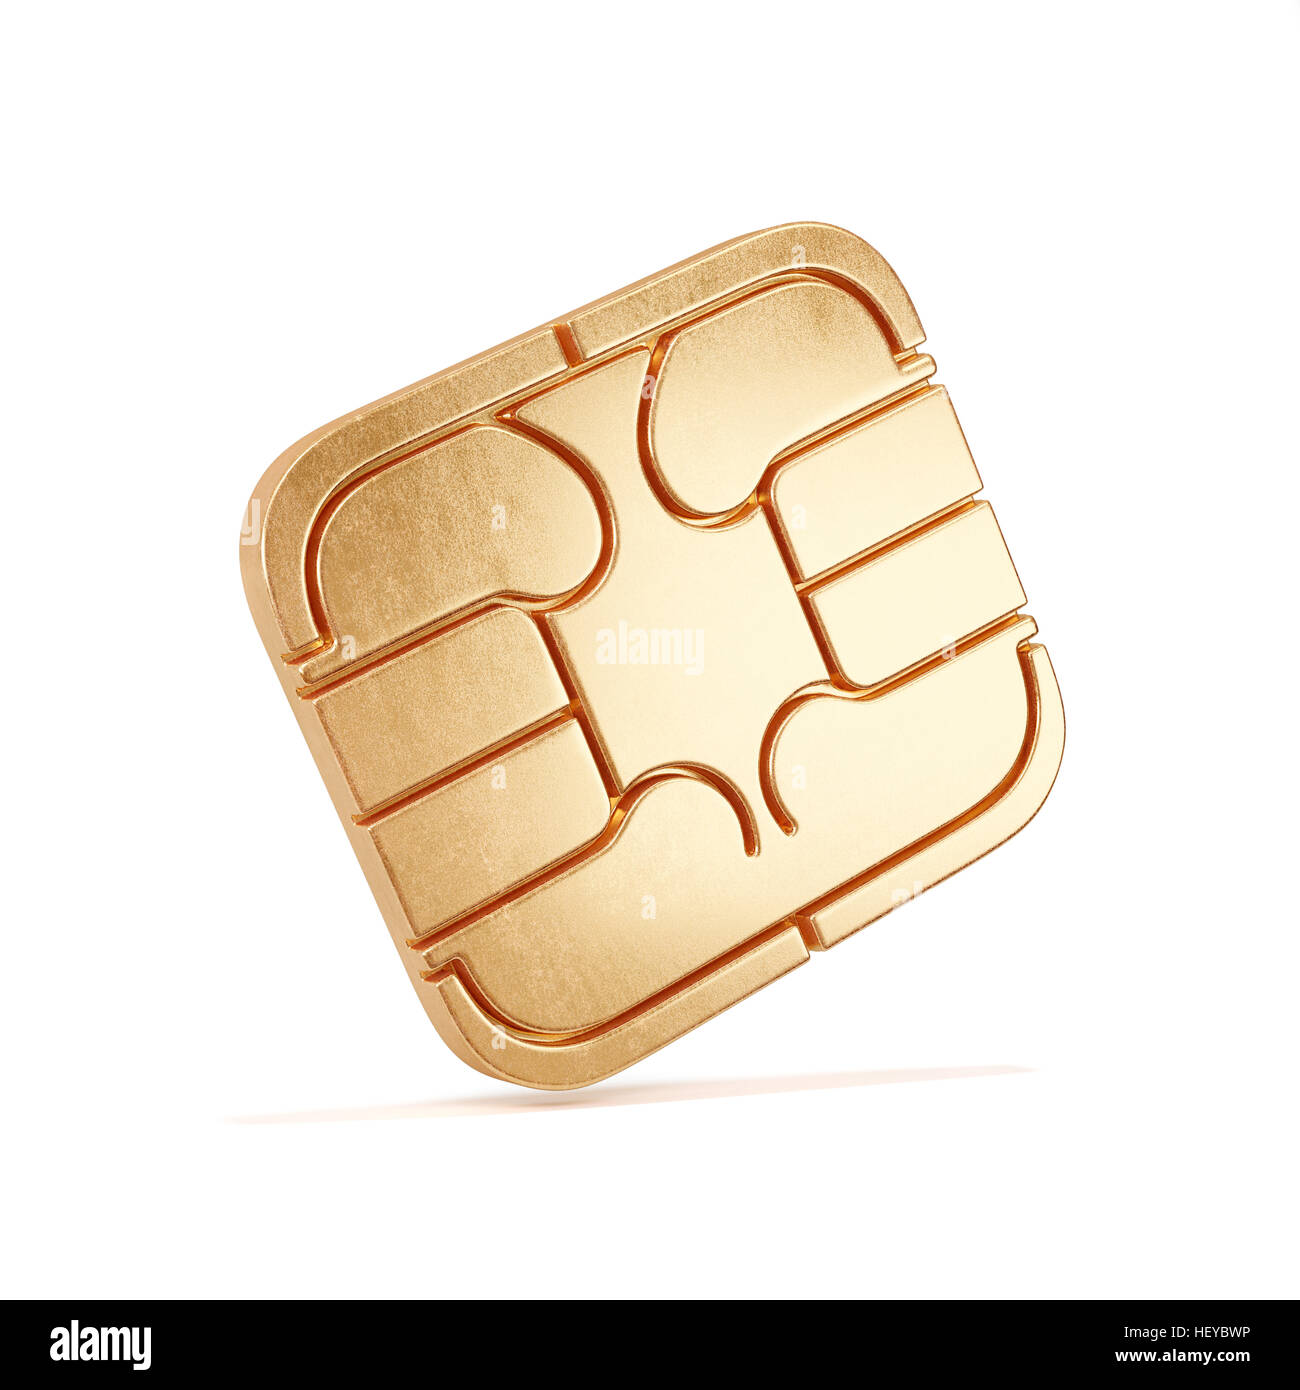 SIM card chip isolated on white background. 3d rendering illustration Stock Photo